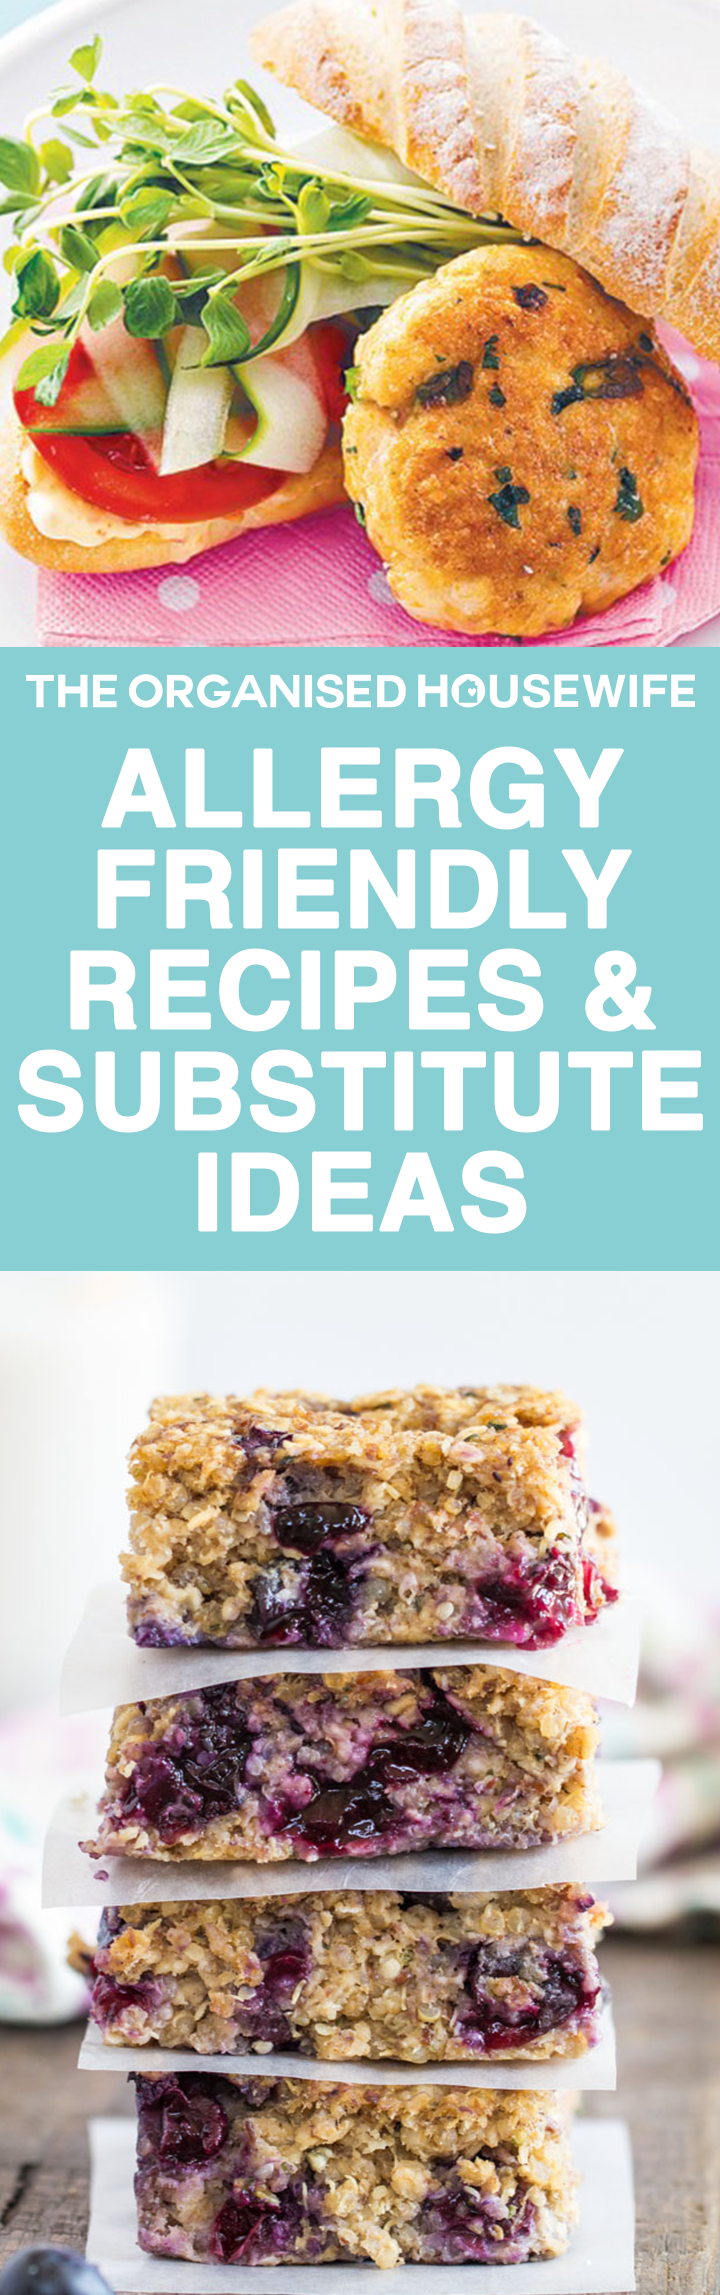 Allergy Friendly Recipes and Substitute Ideas for those who suffer from some food allergies or who have a guest visiting and unsure what foods to cook.